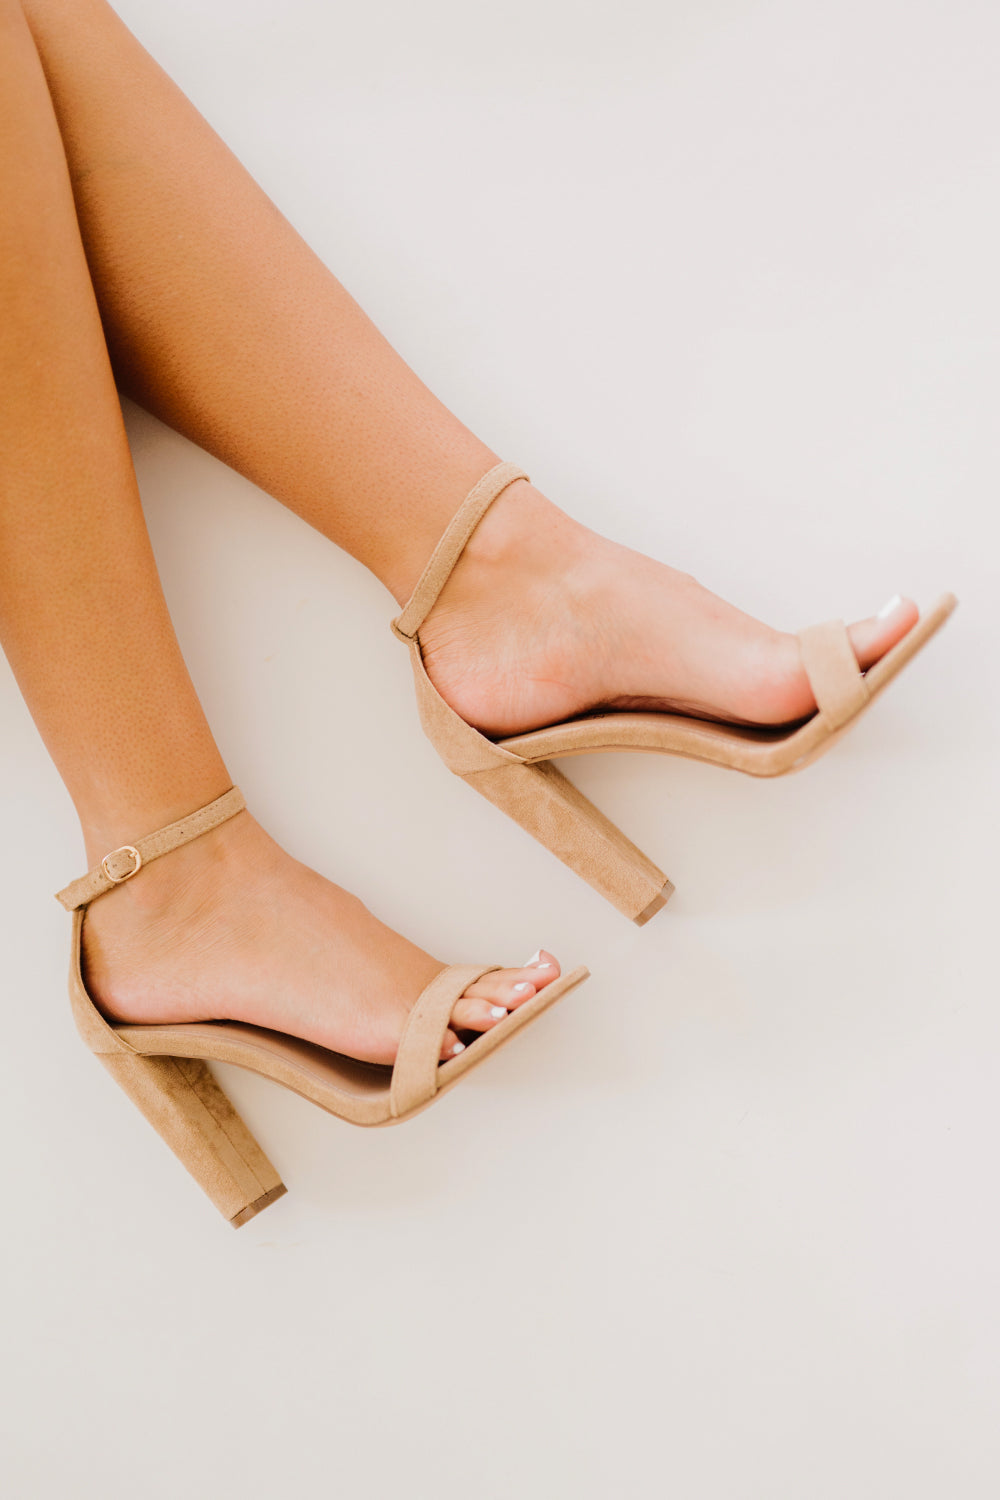 KAYLEEN Standing Tall Square Toe Block Heel Sandals in Taupe - 99fab 